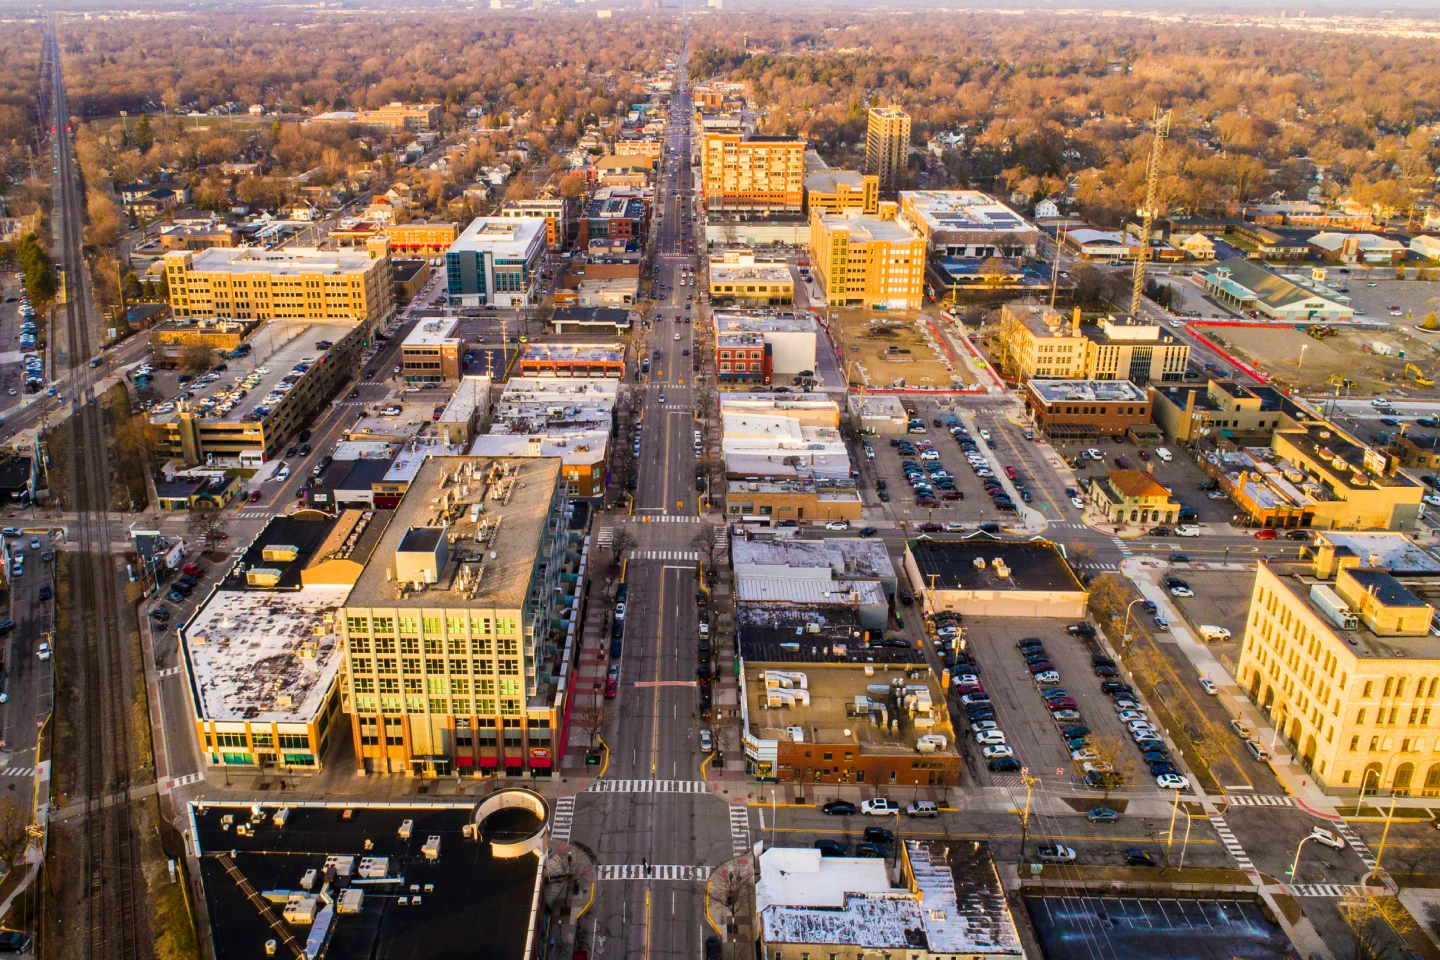 An aerial view of the streets of Detroit.